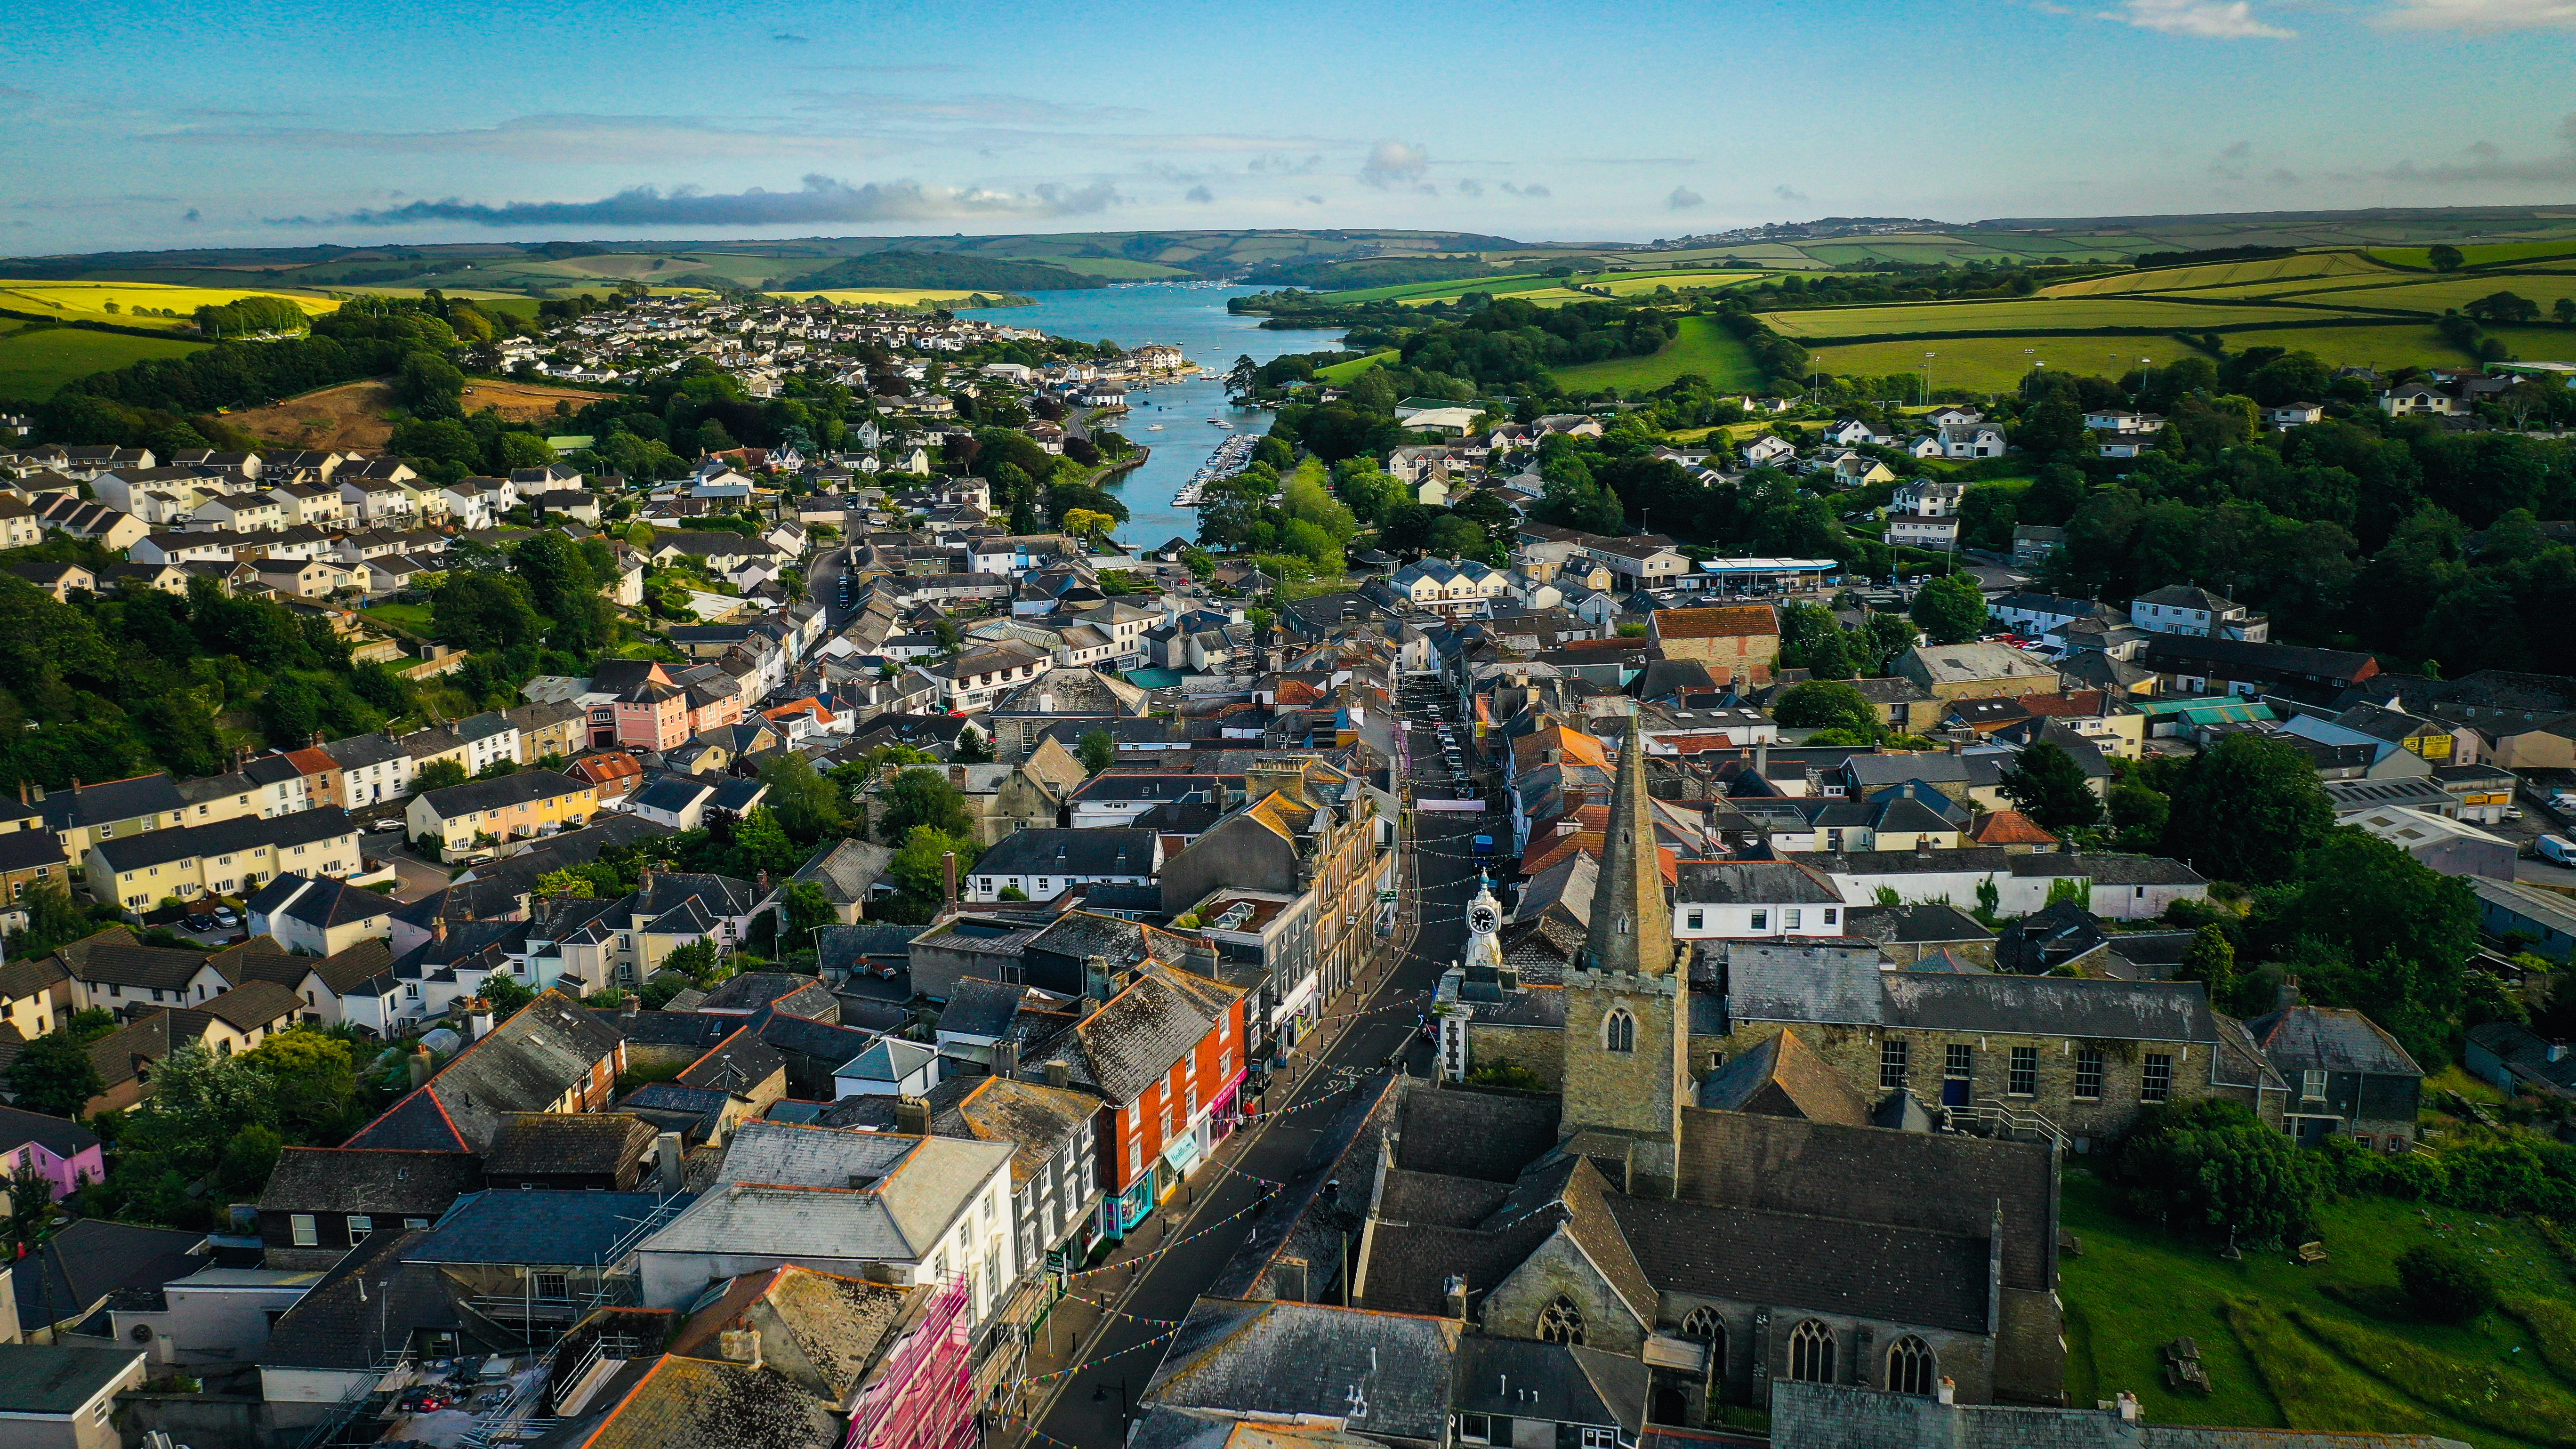 An aerial photograph of Kingsbridge highlighting the natural landscape in the South Hams